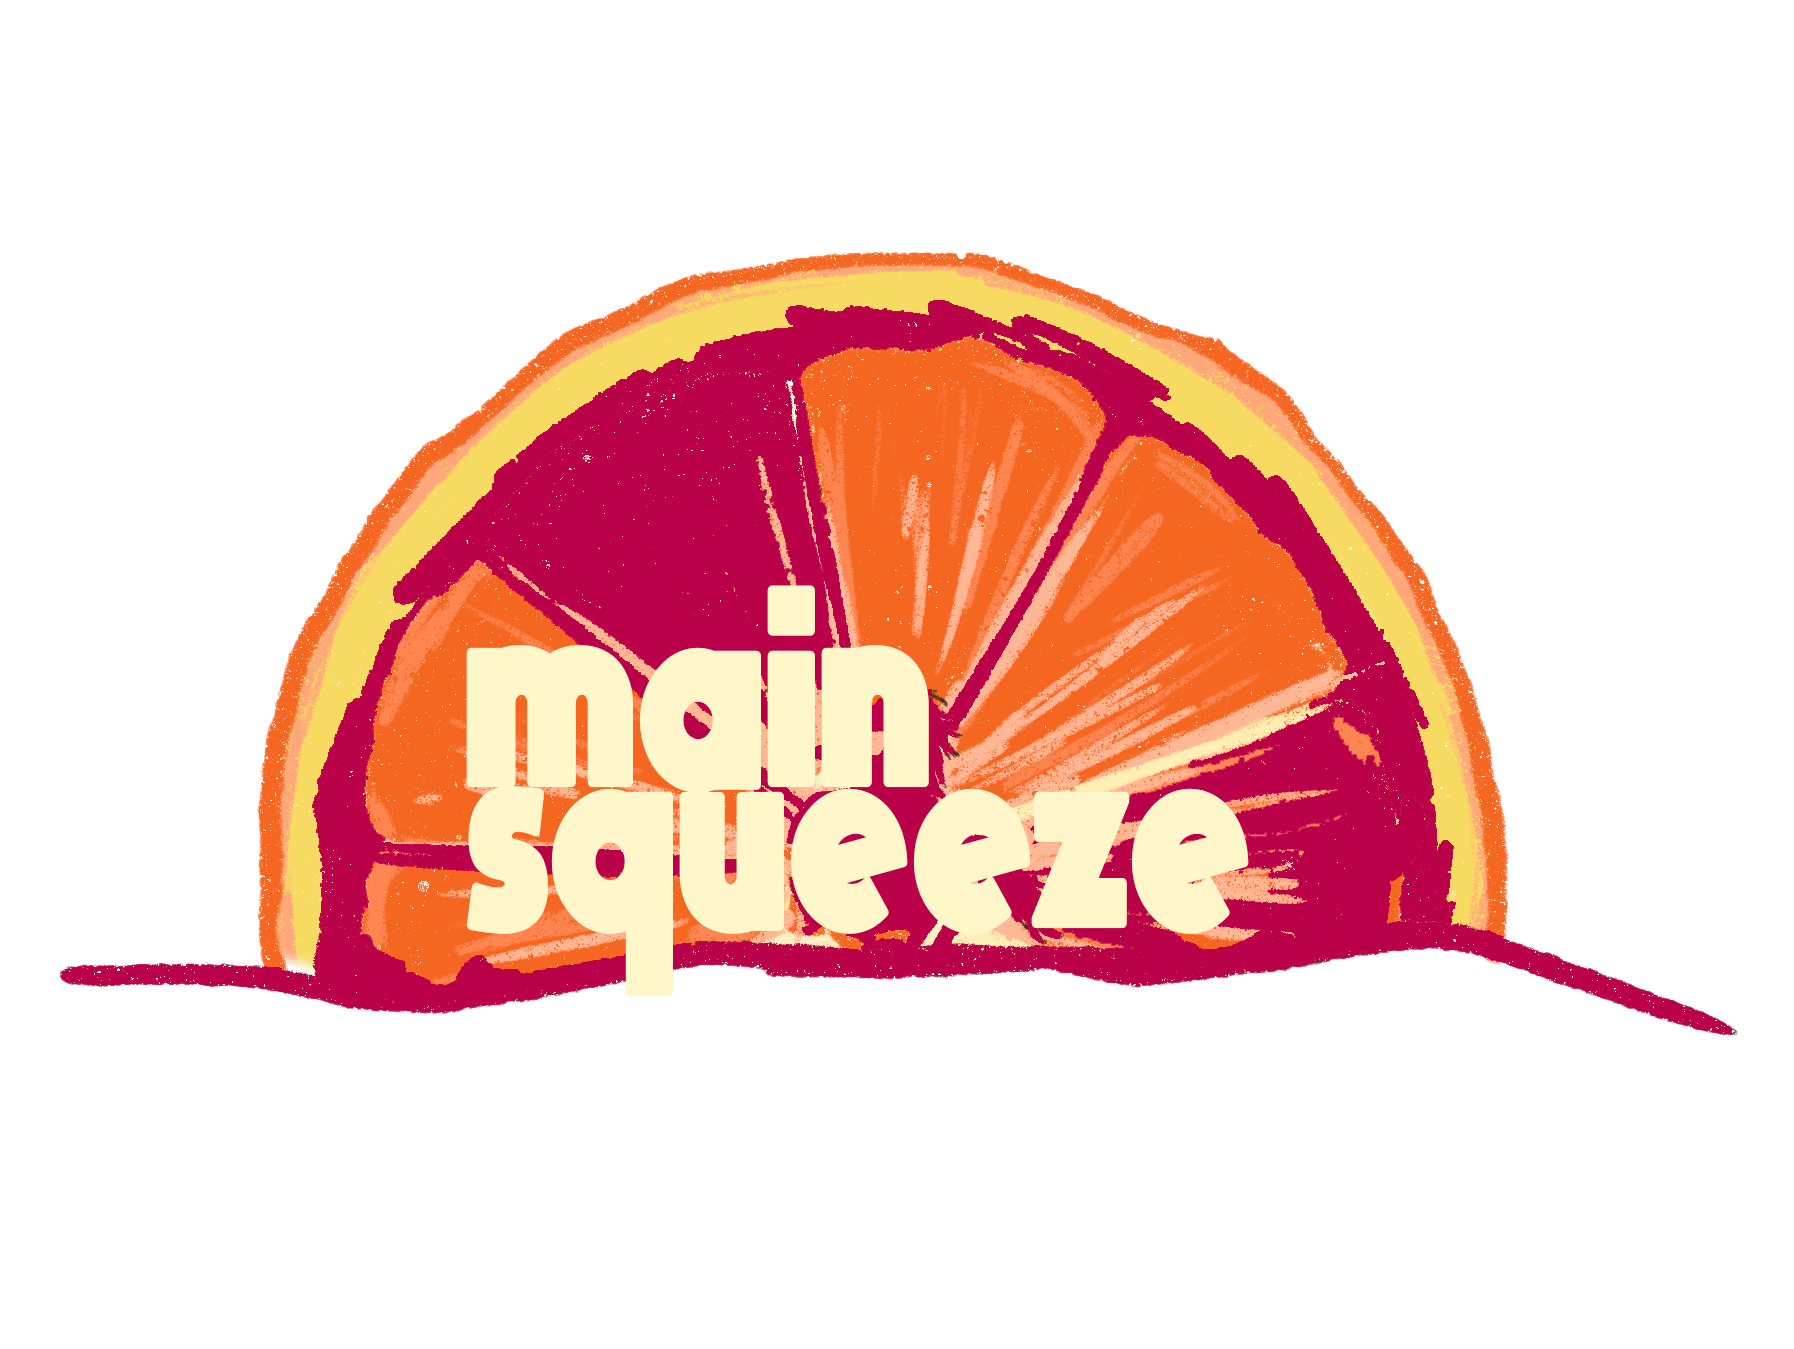 Main Squeeze Literary Journal